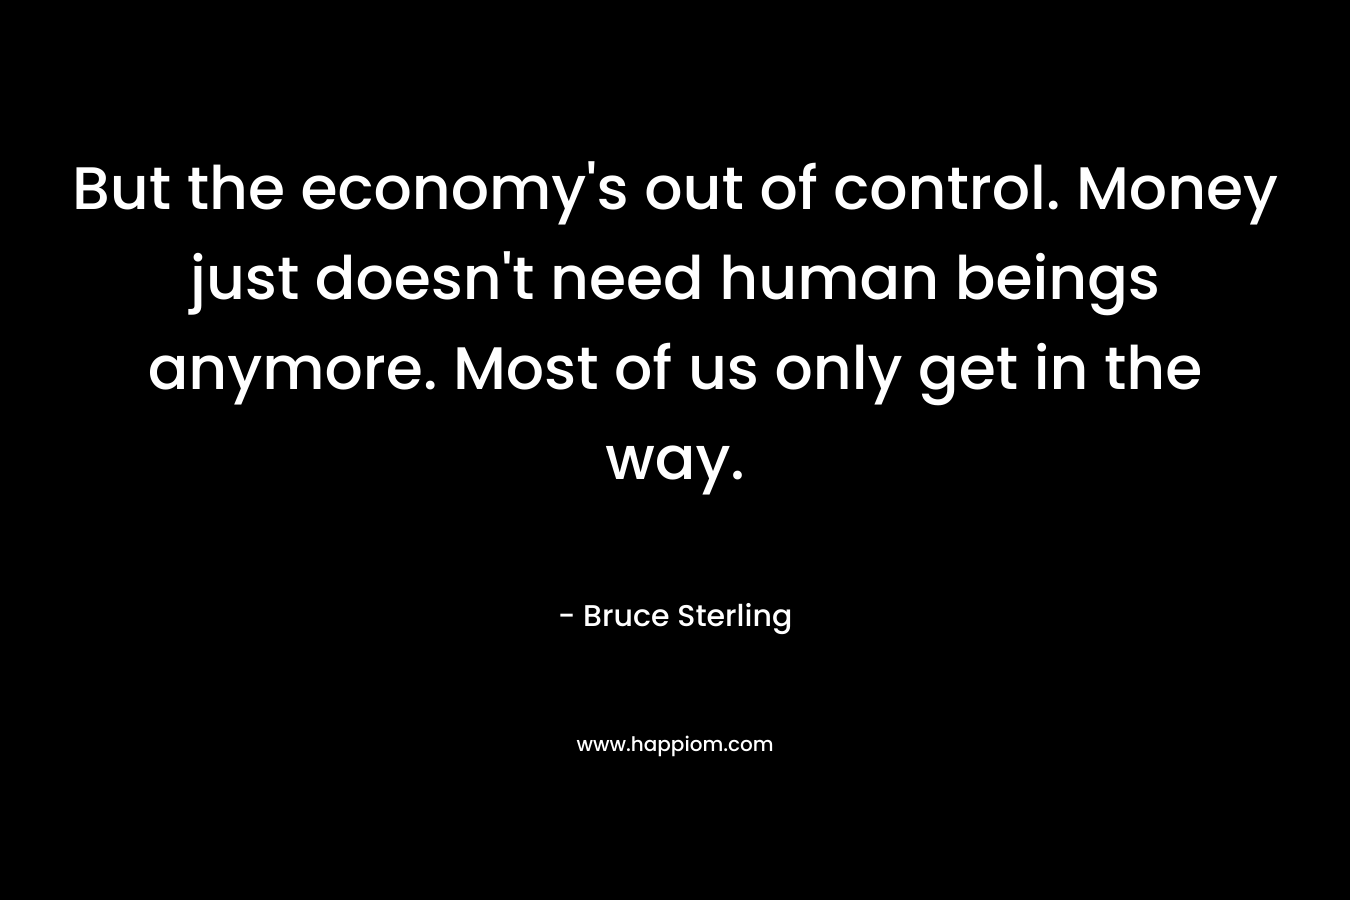 But the economy's out of control. Money just doesn't need human beings anymore. Most of us only get in the way.